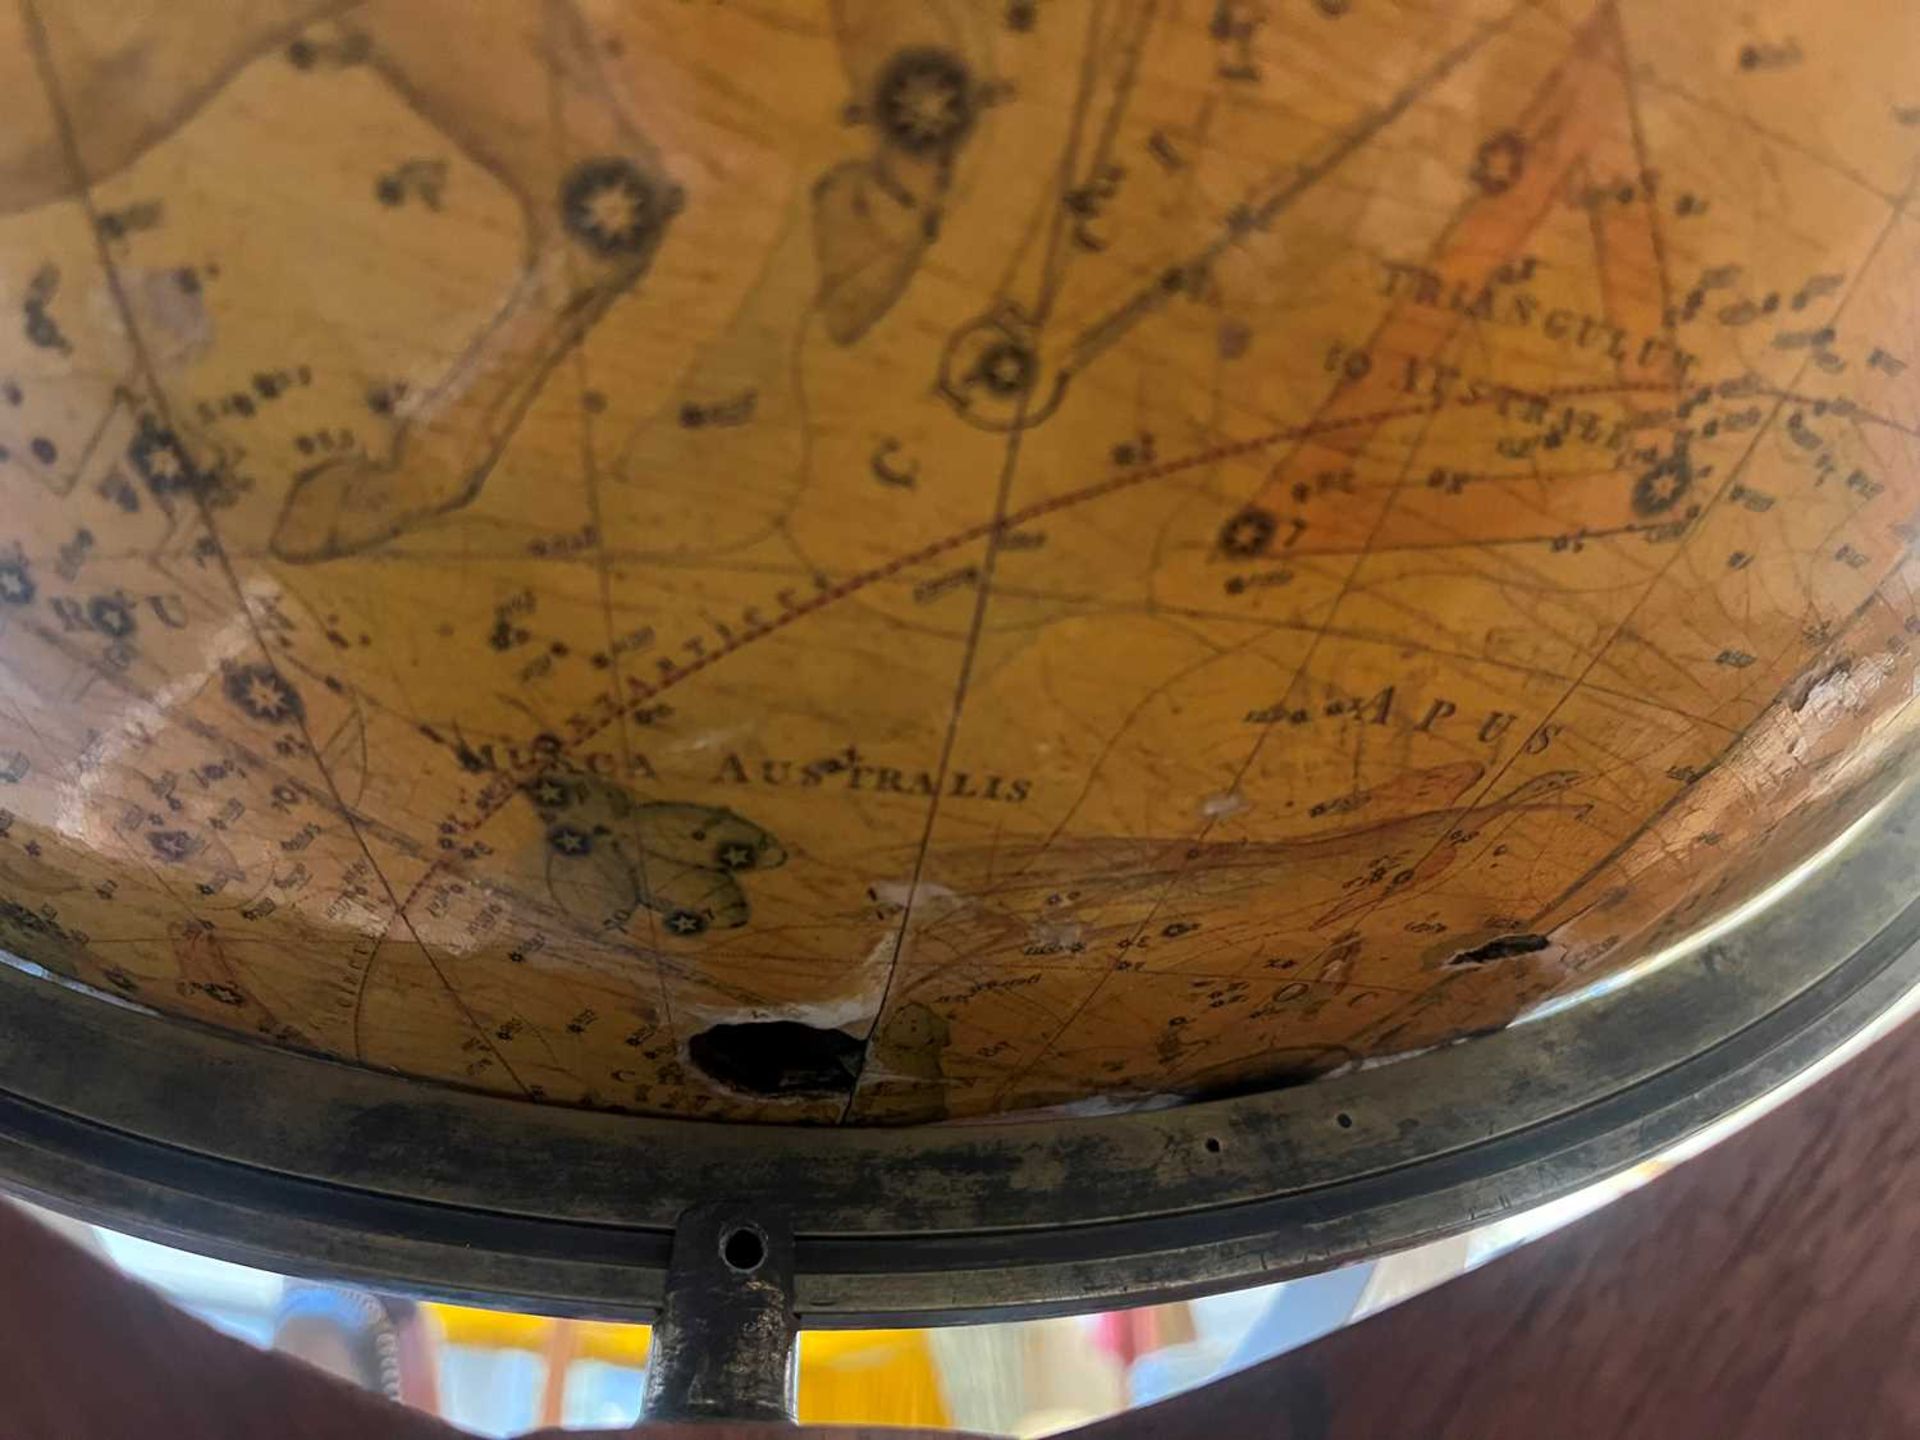 A large celestial library globe by J & W Cary, - Image 80 of 84